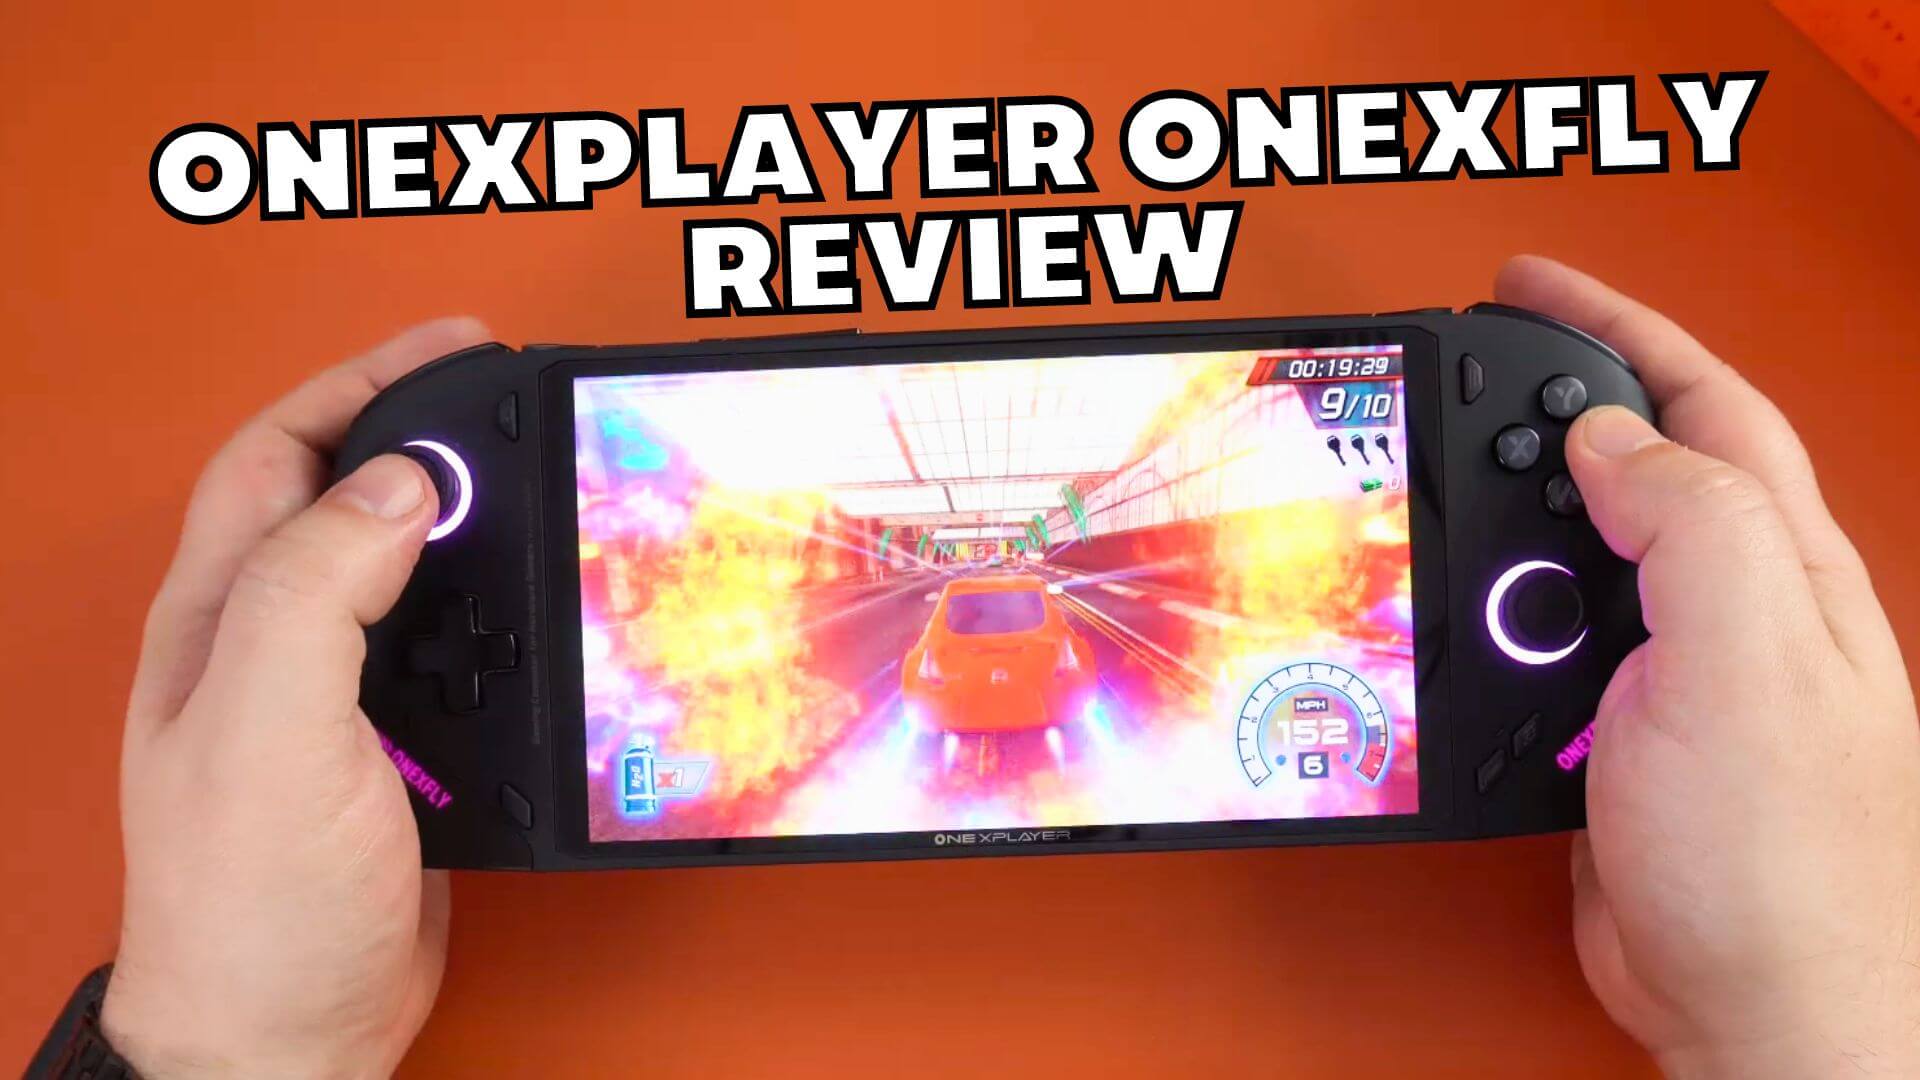 ONEXPLAYER ONEXFLY Review – A solid medium sized handheld gaming PC